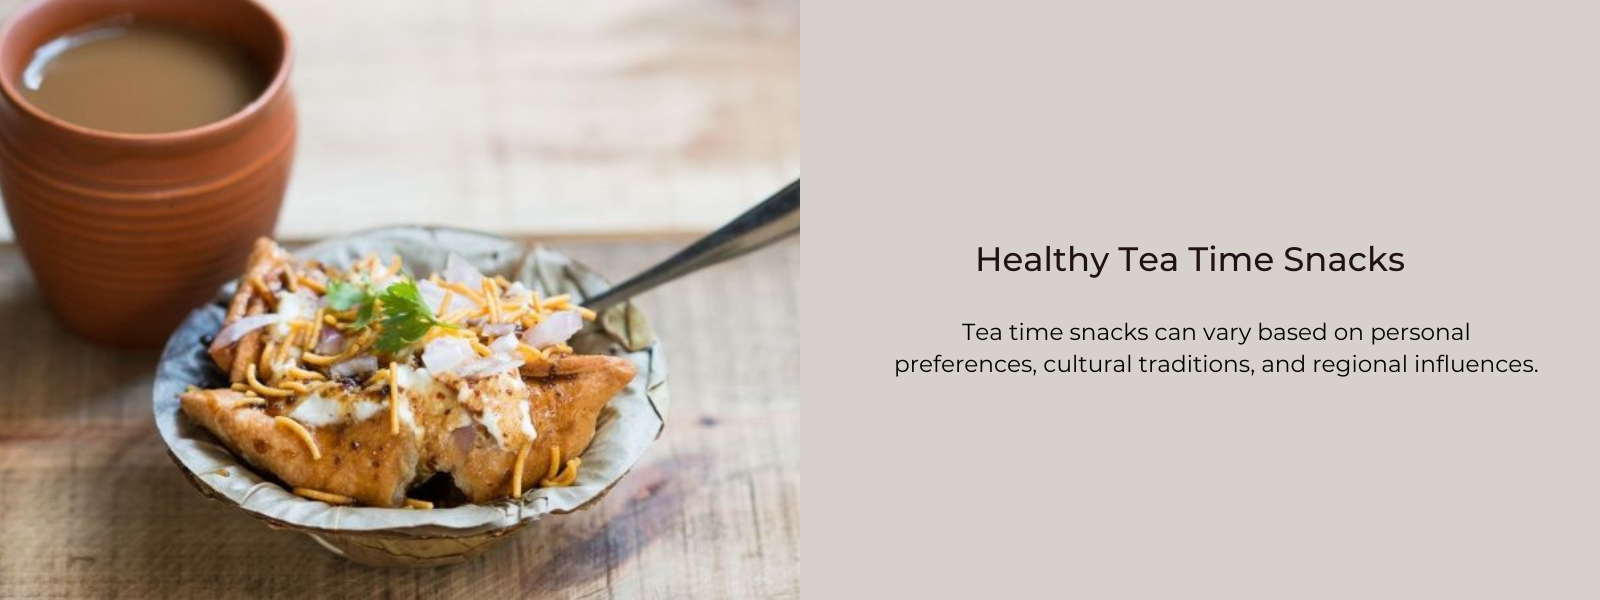 Healthy Tea Time Snacks for Weight Management